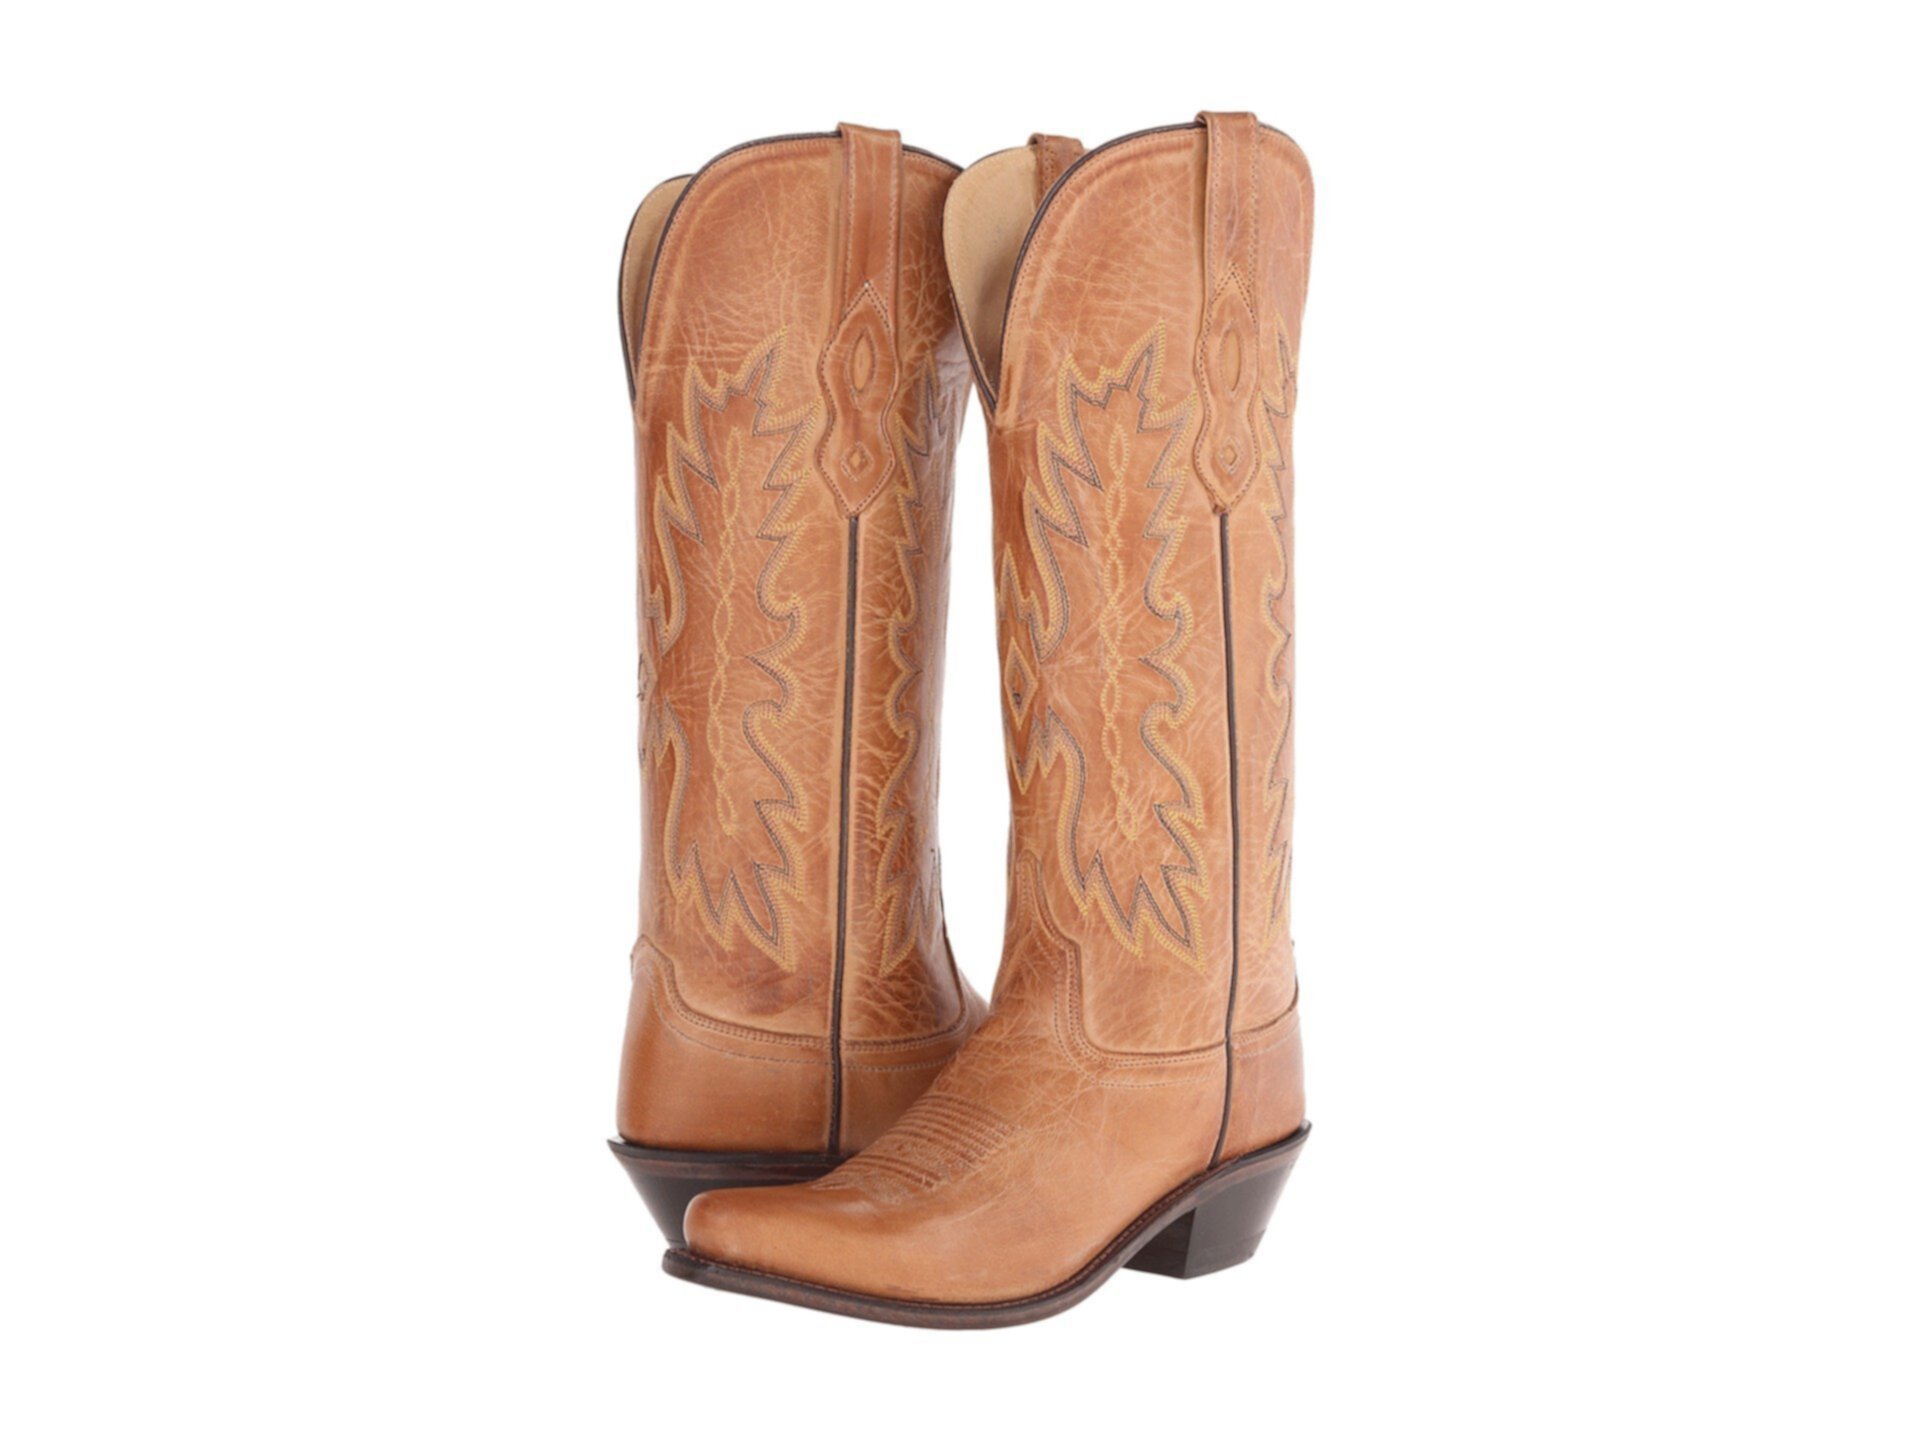 TS1541 Old West Boots